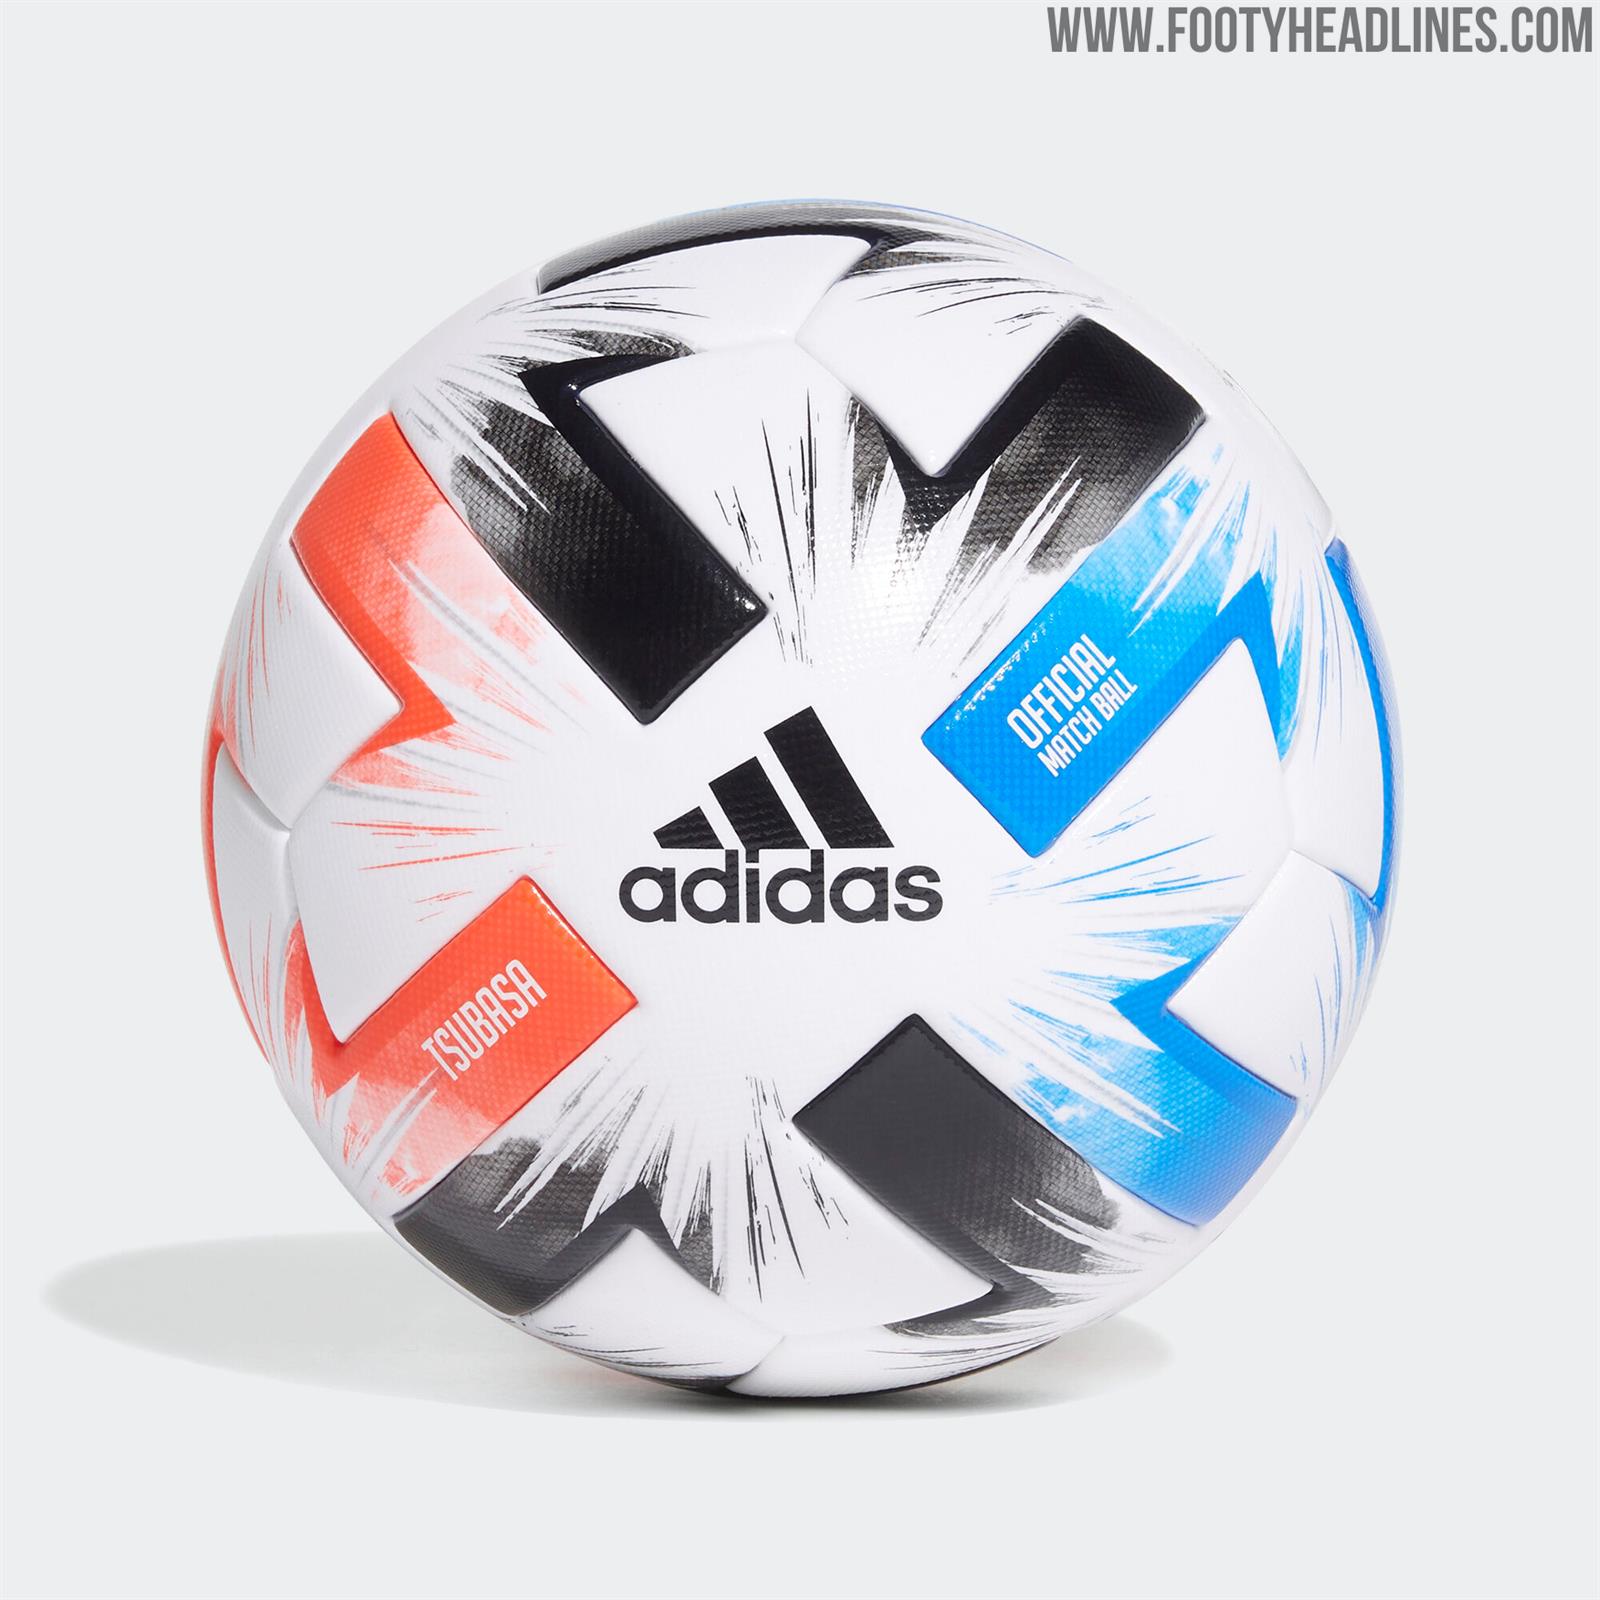 Adidas x Captain Ball Released - Debuted the Cup - Footy Headlines